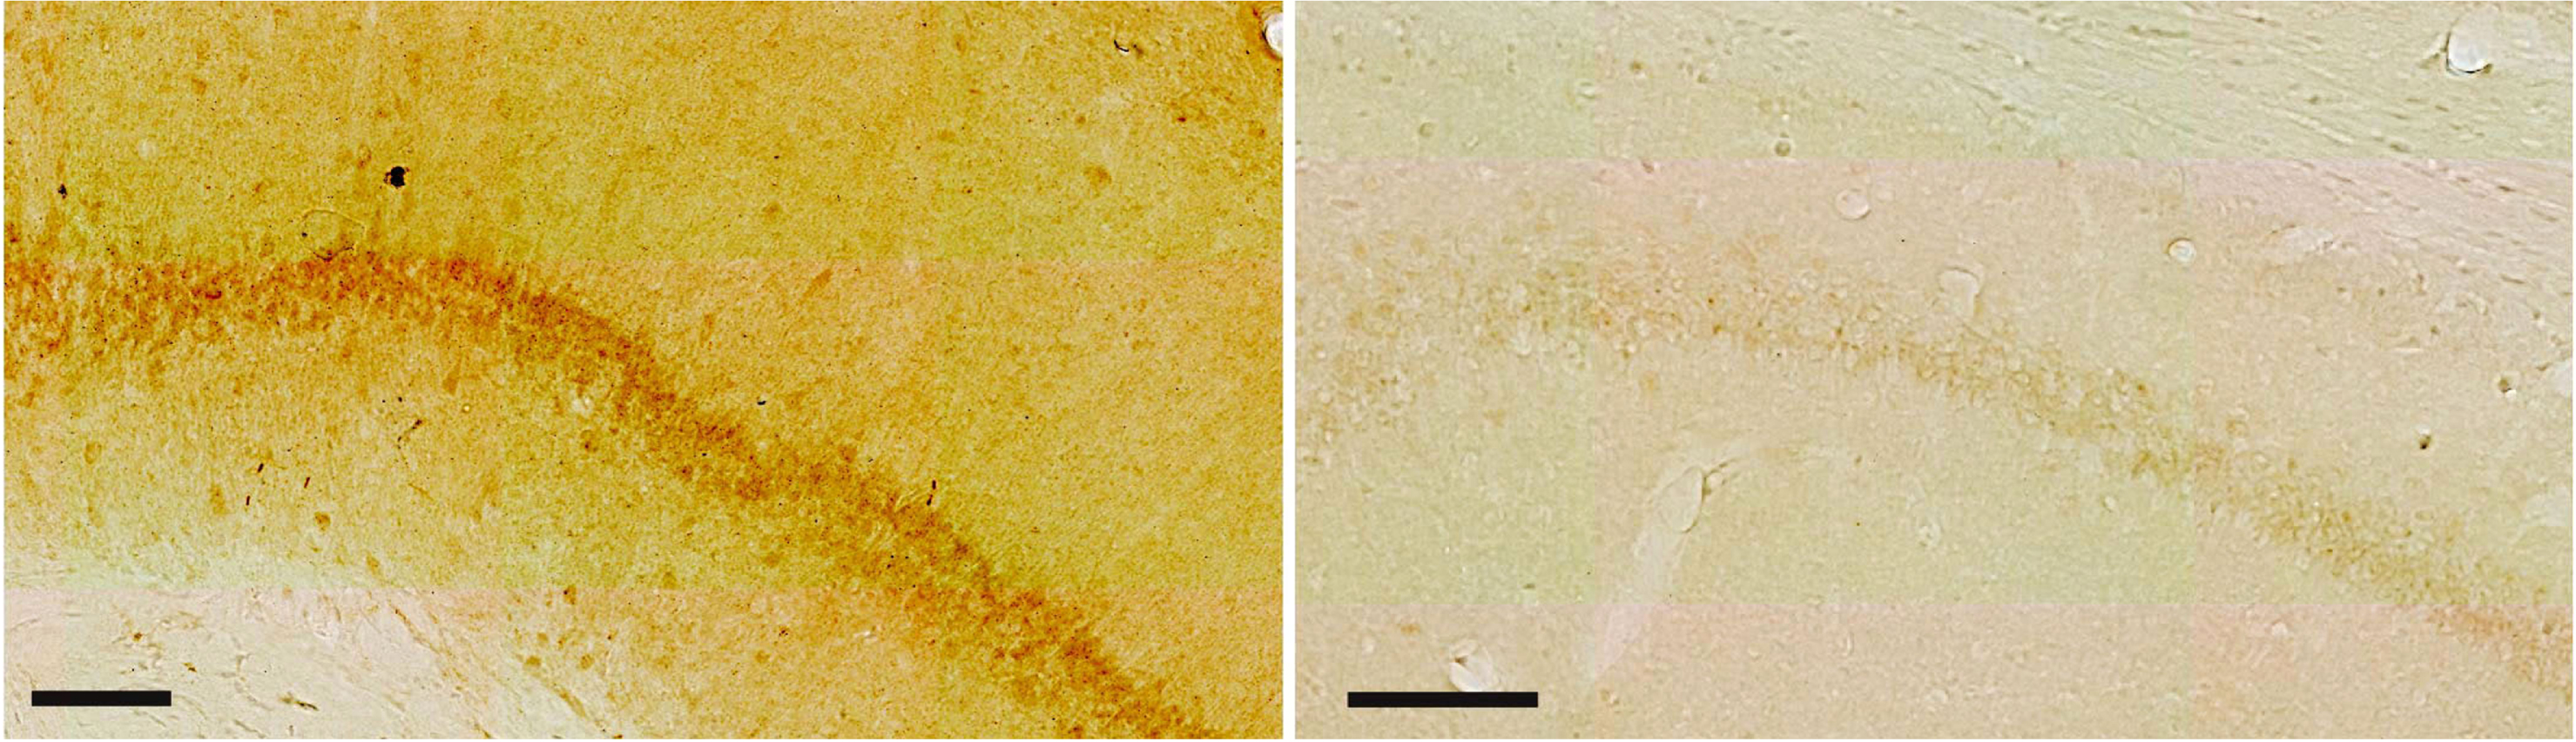 The Aβ42 antibody is specific: (left image) Immunolabeling with the IBL Aβ42 antibody reveals a high level of signal in CA1 of three-month-old Wistar rats, while (right image) practically no signal is present in CA1 of 6-month-old APP-Knockout mice (same results were obtained for 12-month-old APP-Knockout mice). Scale bars = 100μm. Images were acquired using identical settings.